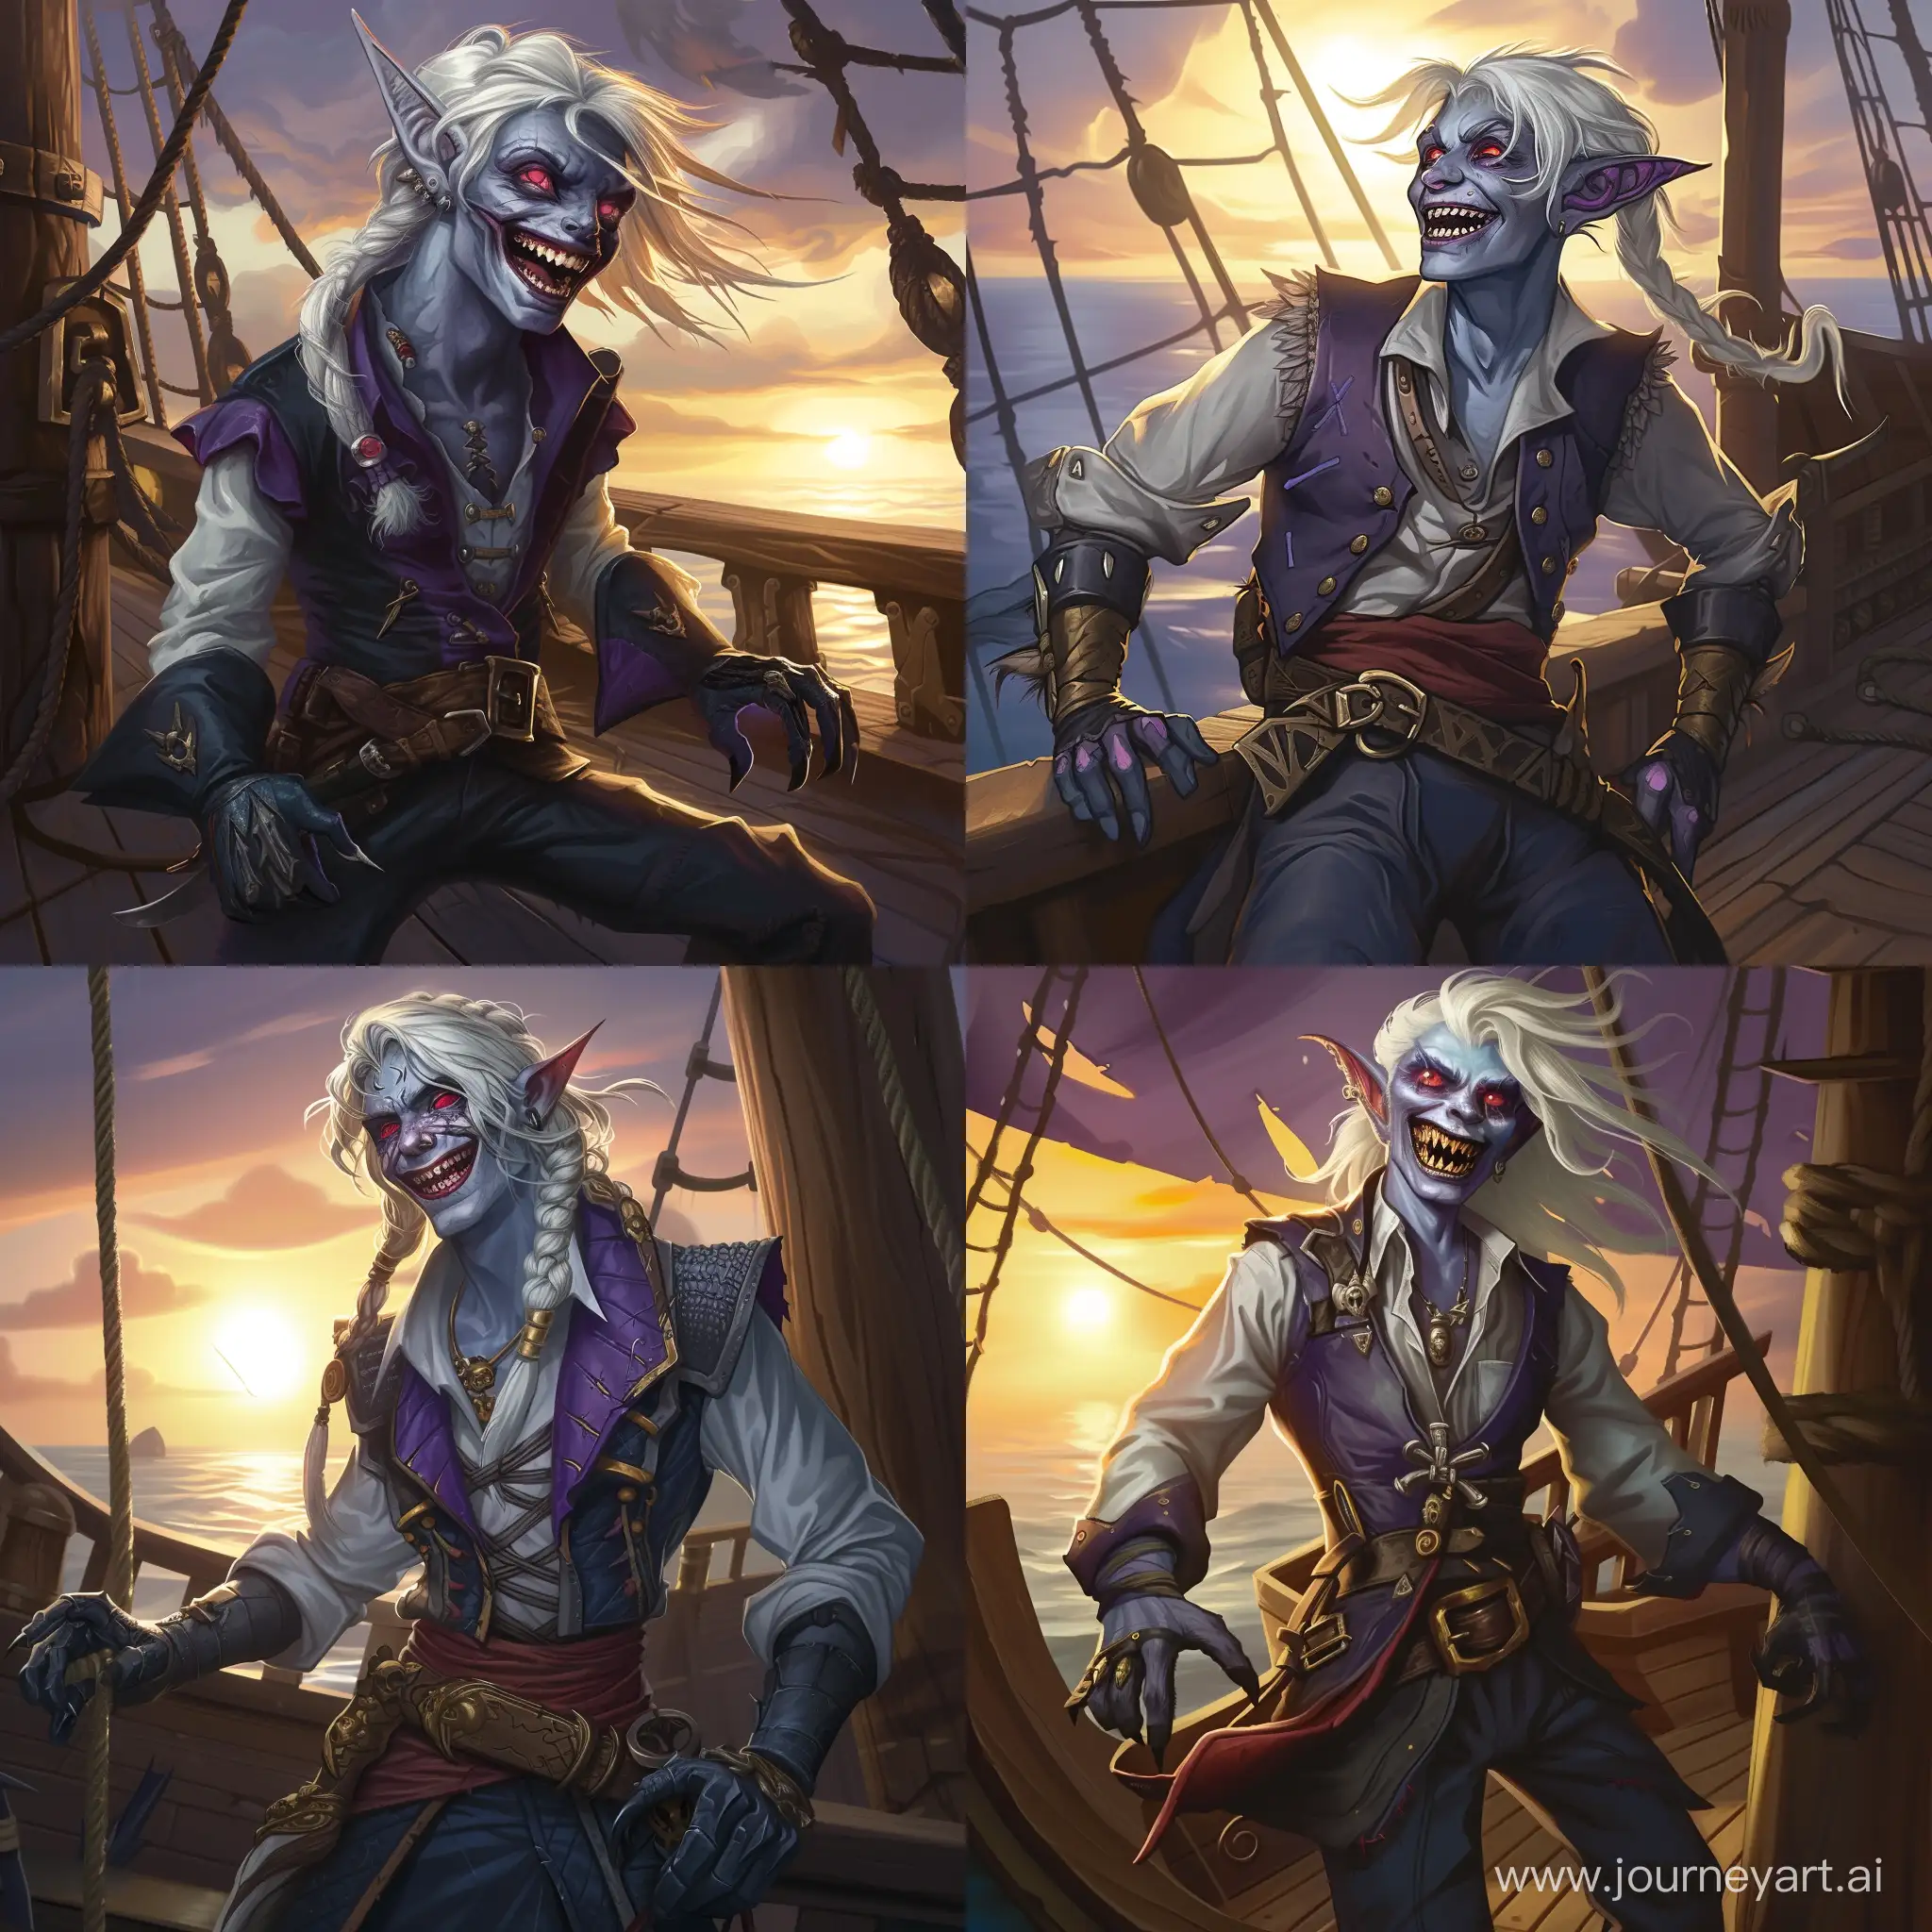 Drow-Pirate-Swashbuckler-at-Sunset-on-Pirate-Ship